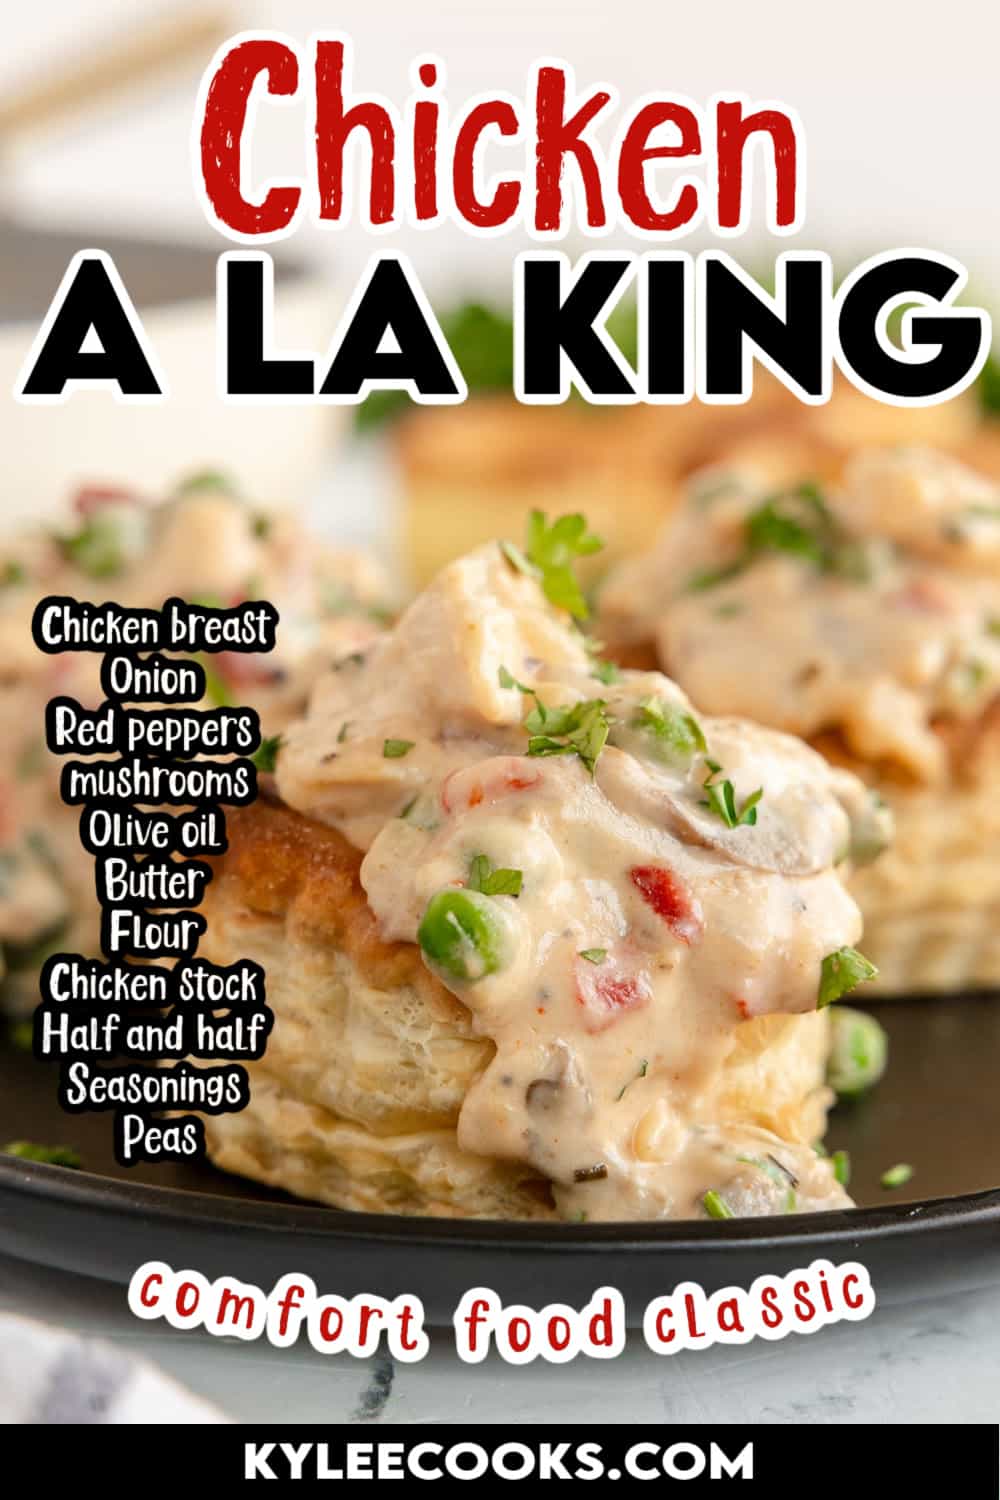 chicken a la king, on a pastry case with recipe name overlaid in text.